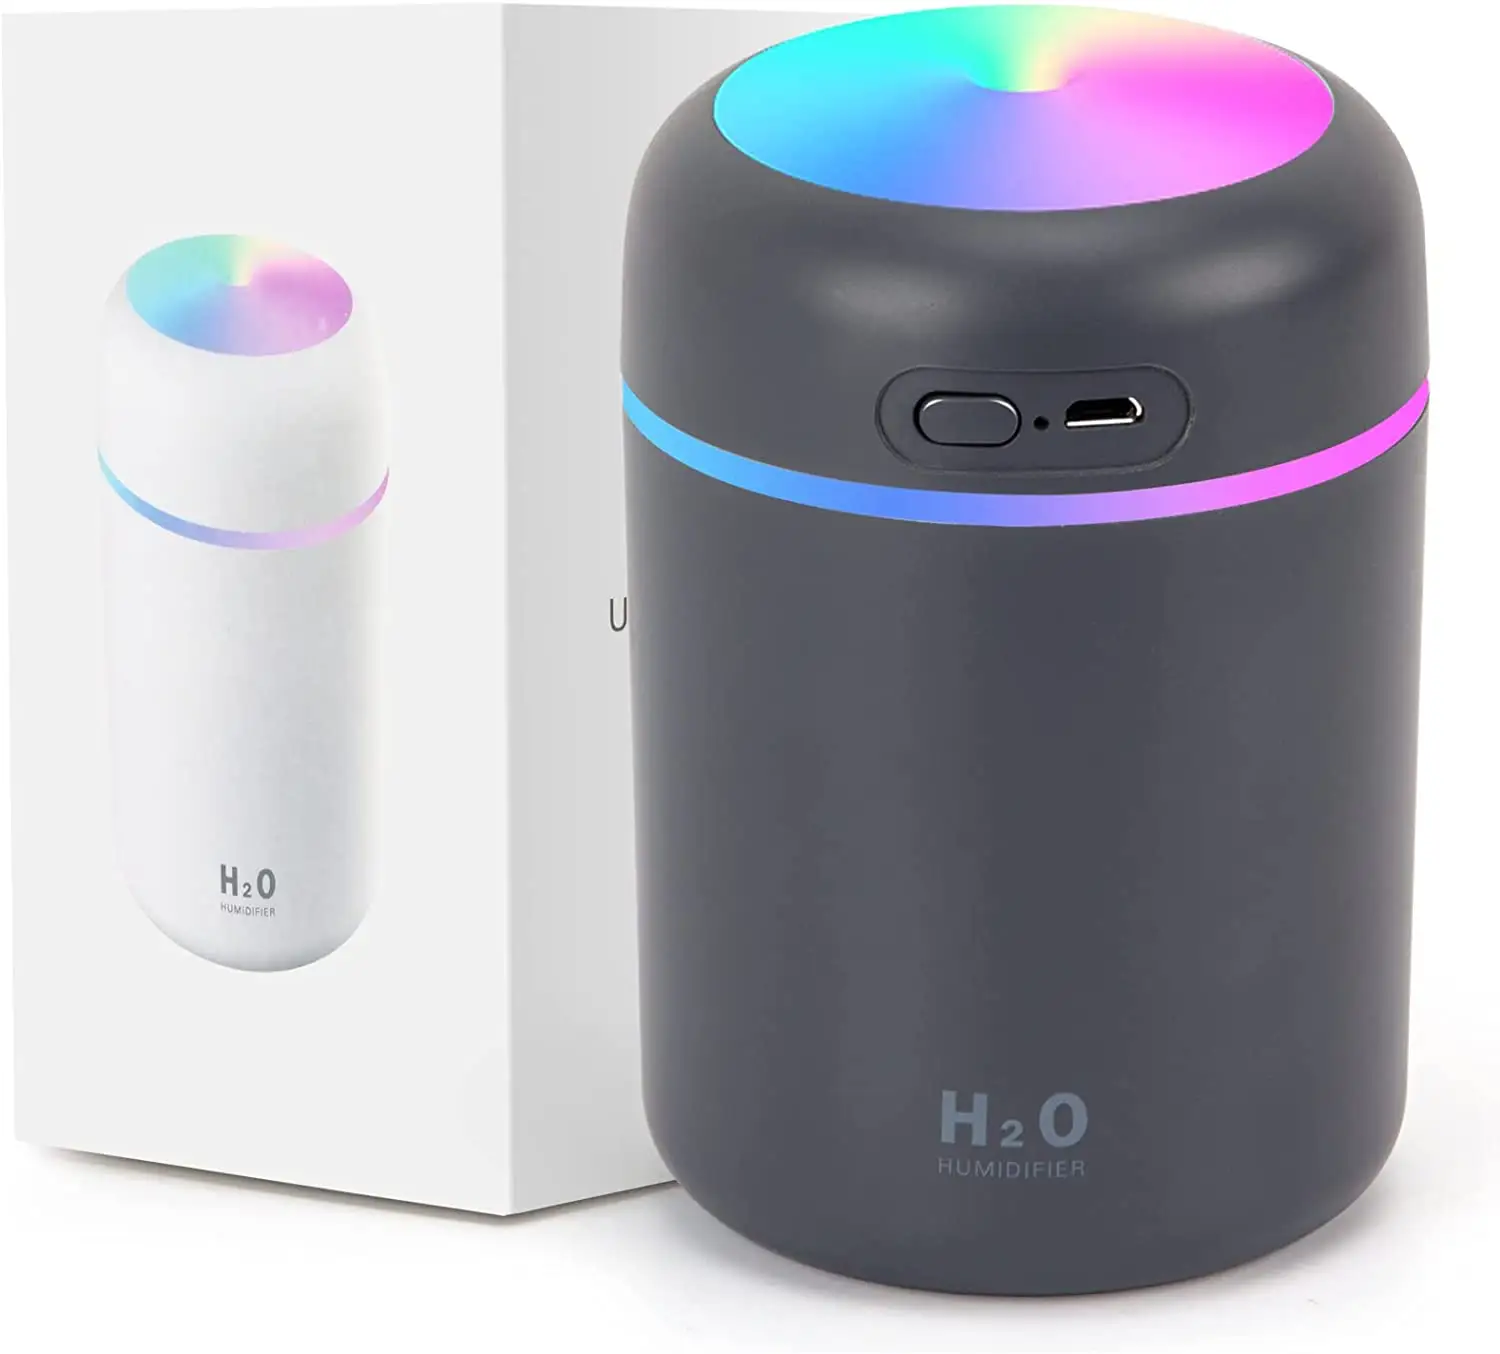 Best Selling for Personal Store Colorful USB Humidifier Mini Perfume Atomizer Ultrasonic Humidifier for Home Car Hotel School